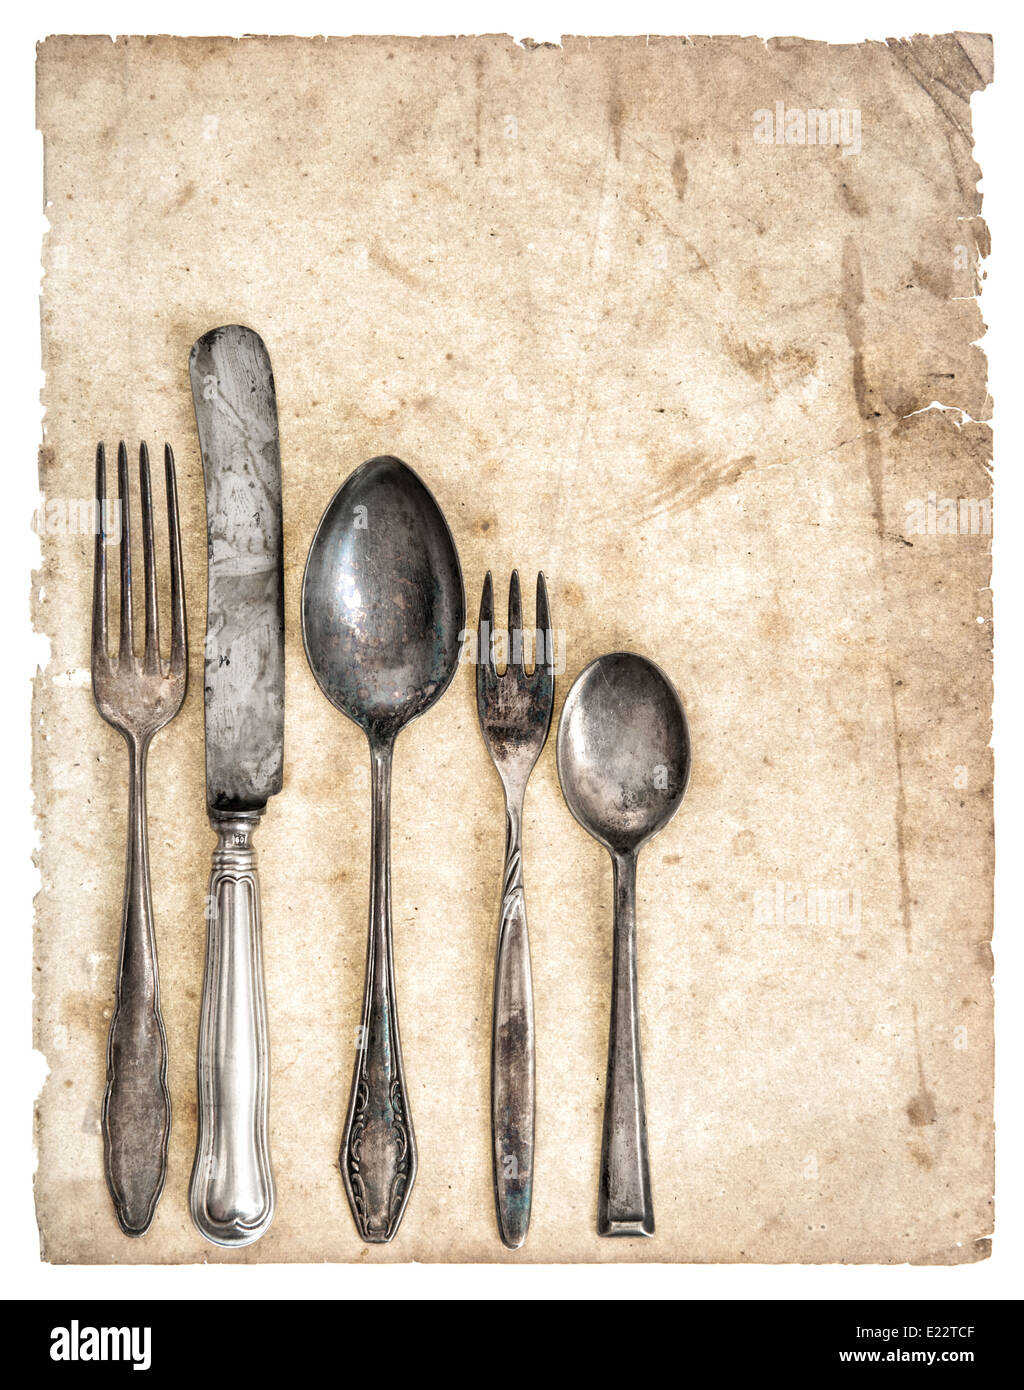 Antique cutlery and old cook book page isolated on white background. Retro kitchen utensils knife, fork and spoons Stock Photo